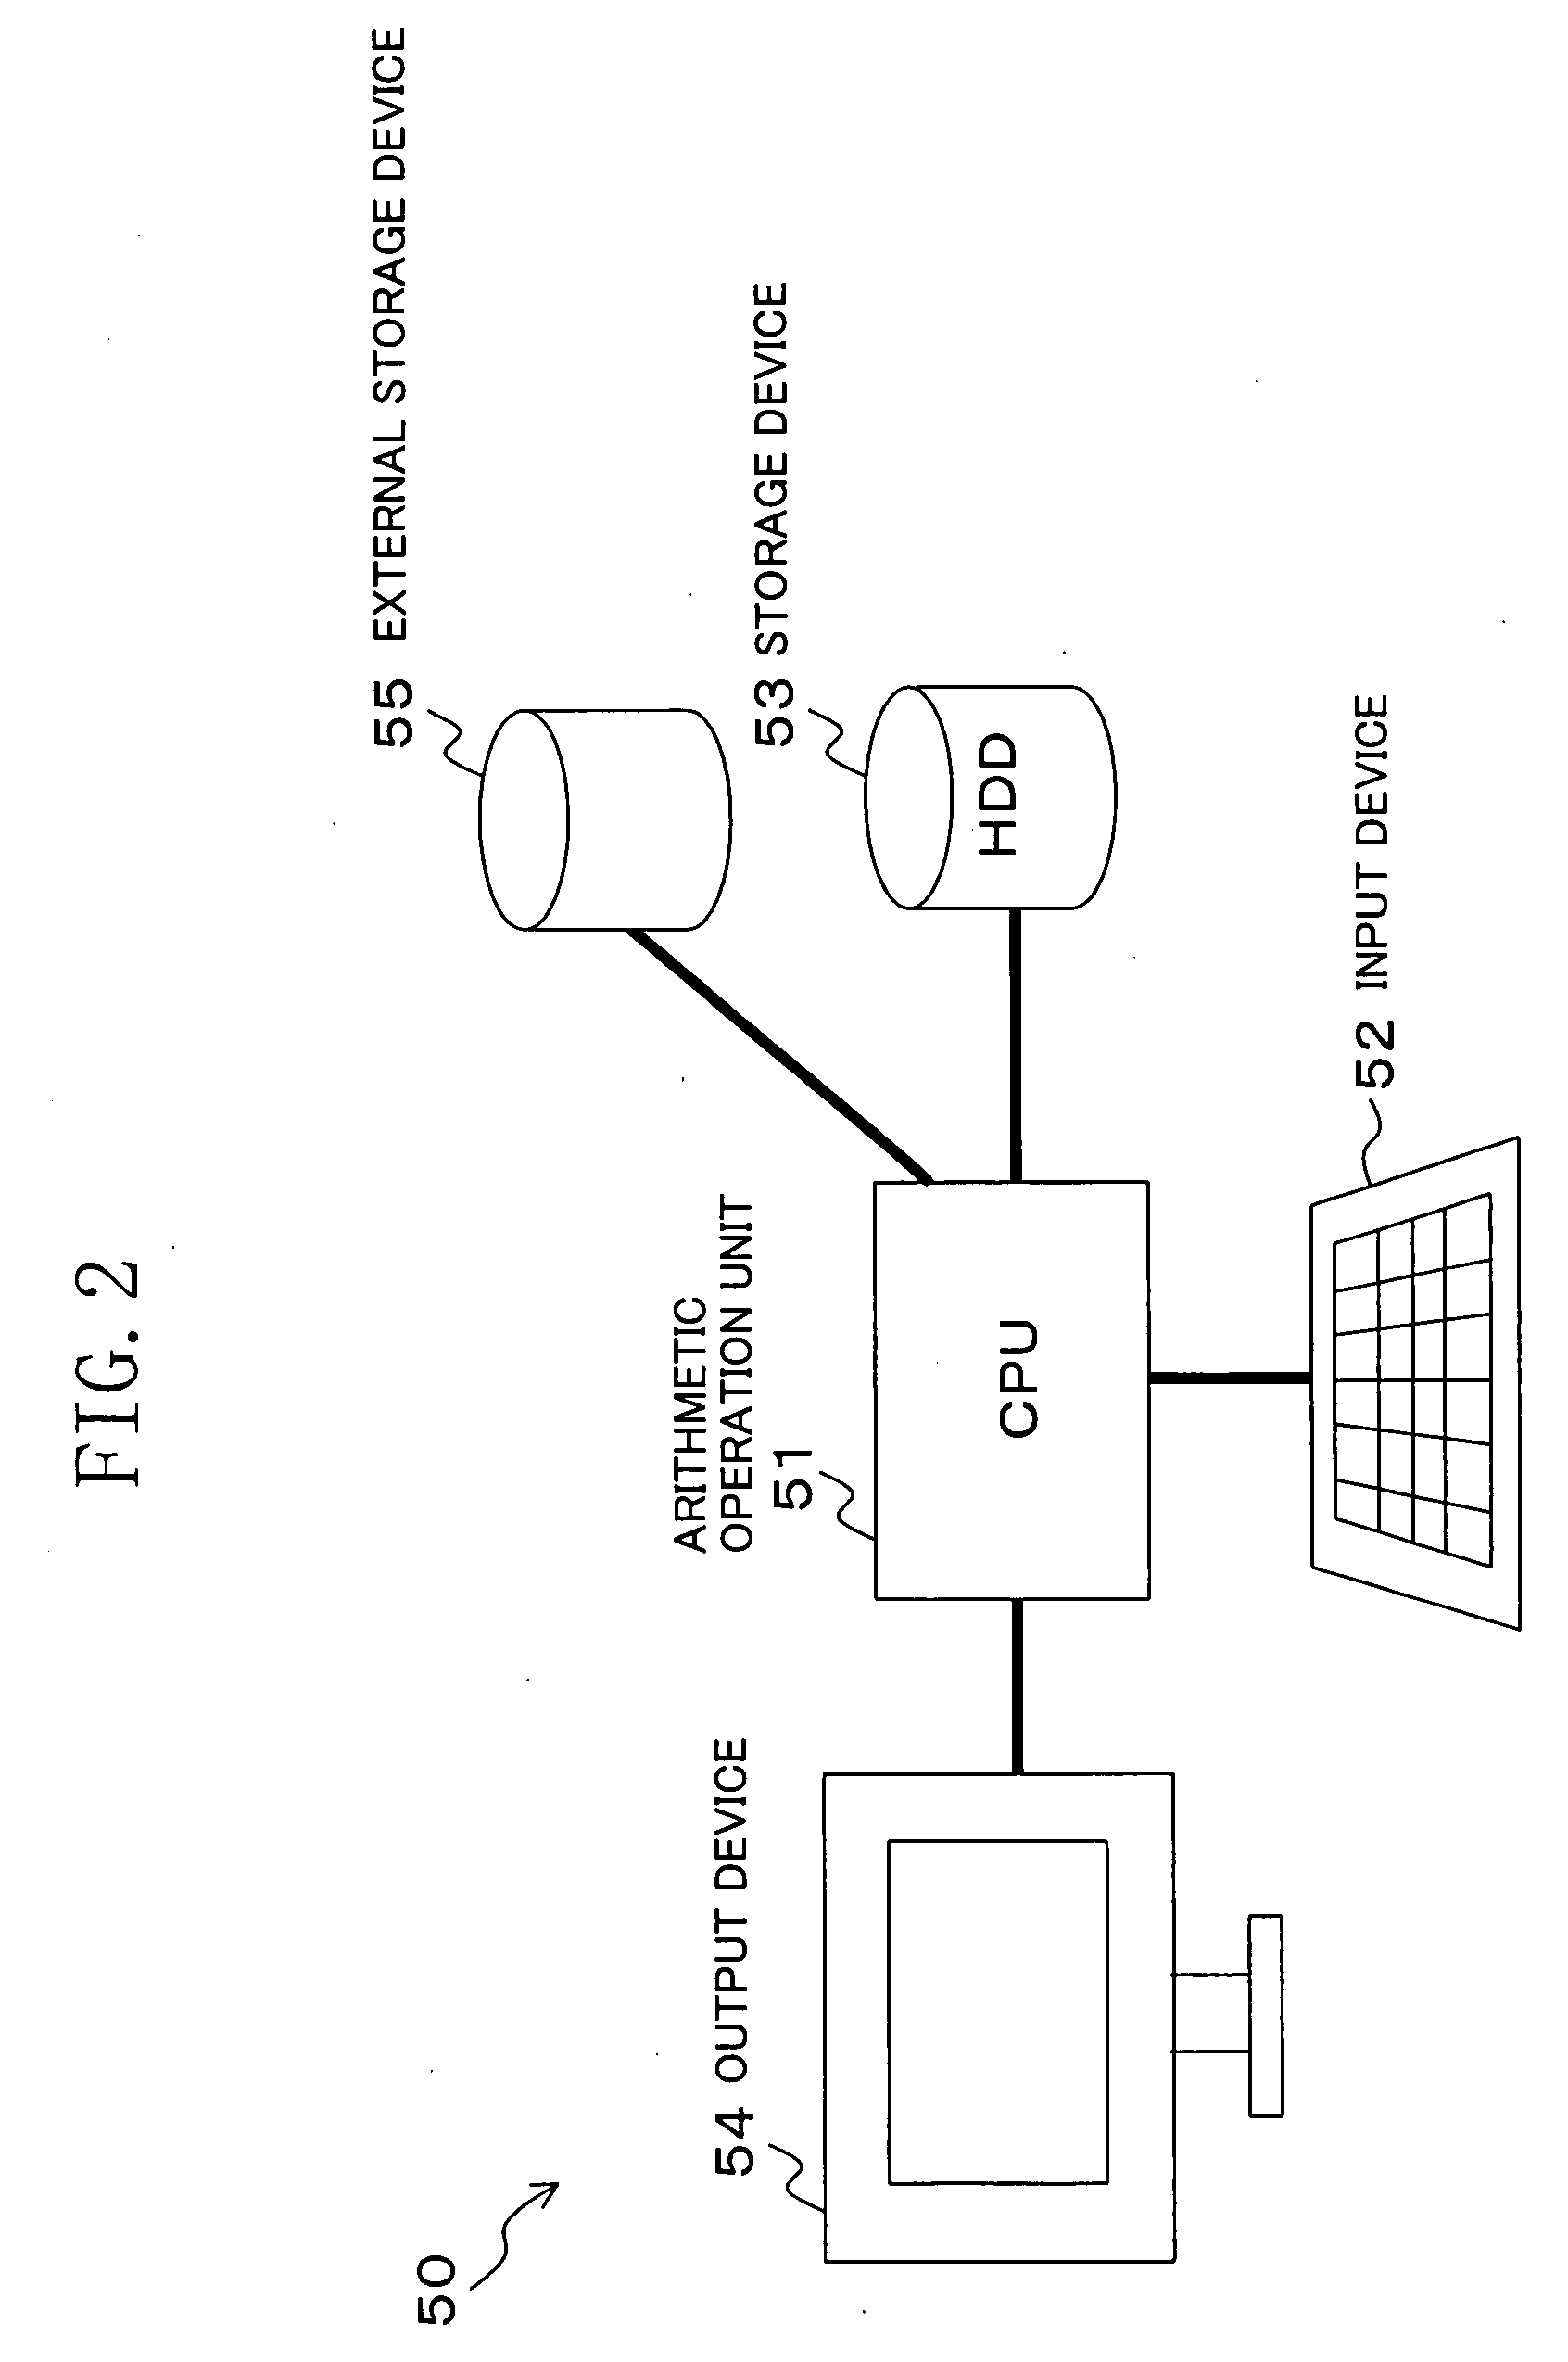 Apparatus and method of static timing analysis considering the within-die and die-to-die process variation